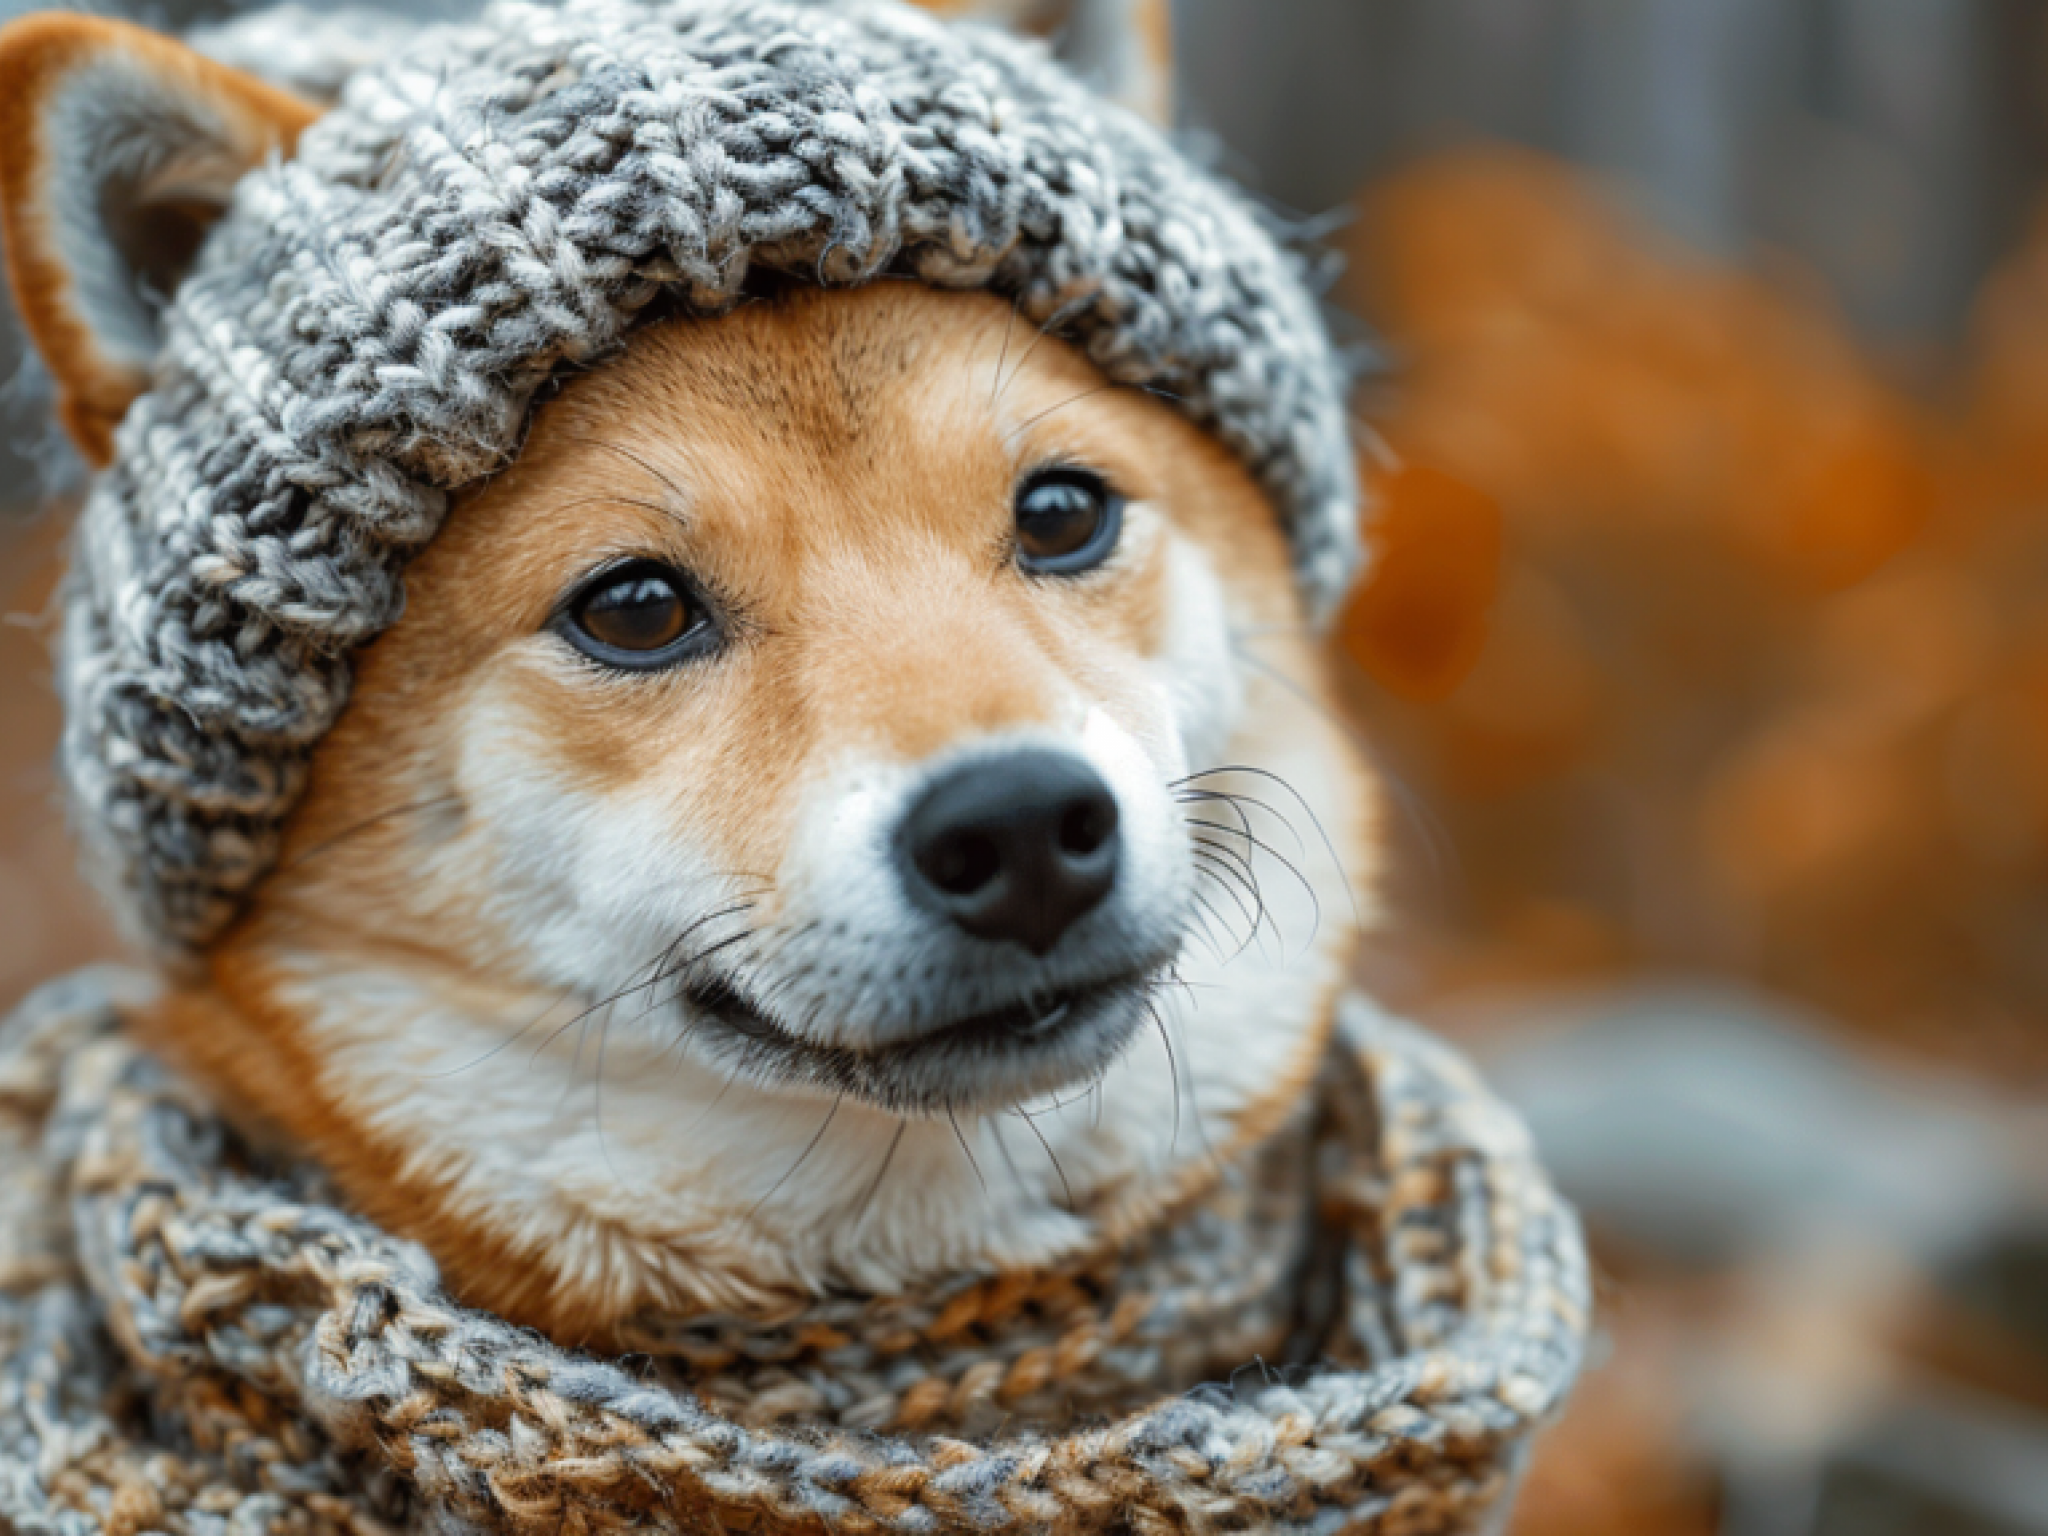  floki-and-wif-bite-off-22-and-12-daily-gains-as-dogecoin-and-shiba-inu-killers-take-the-dog-coin-wheel 